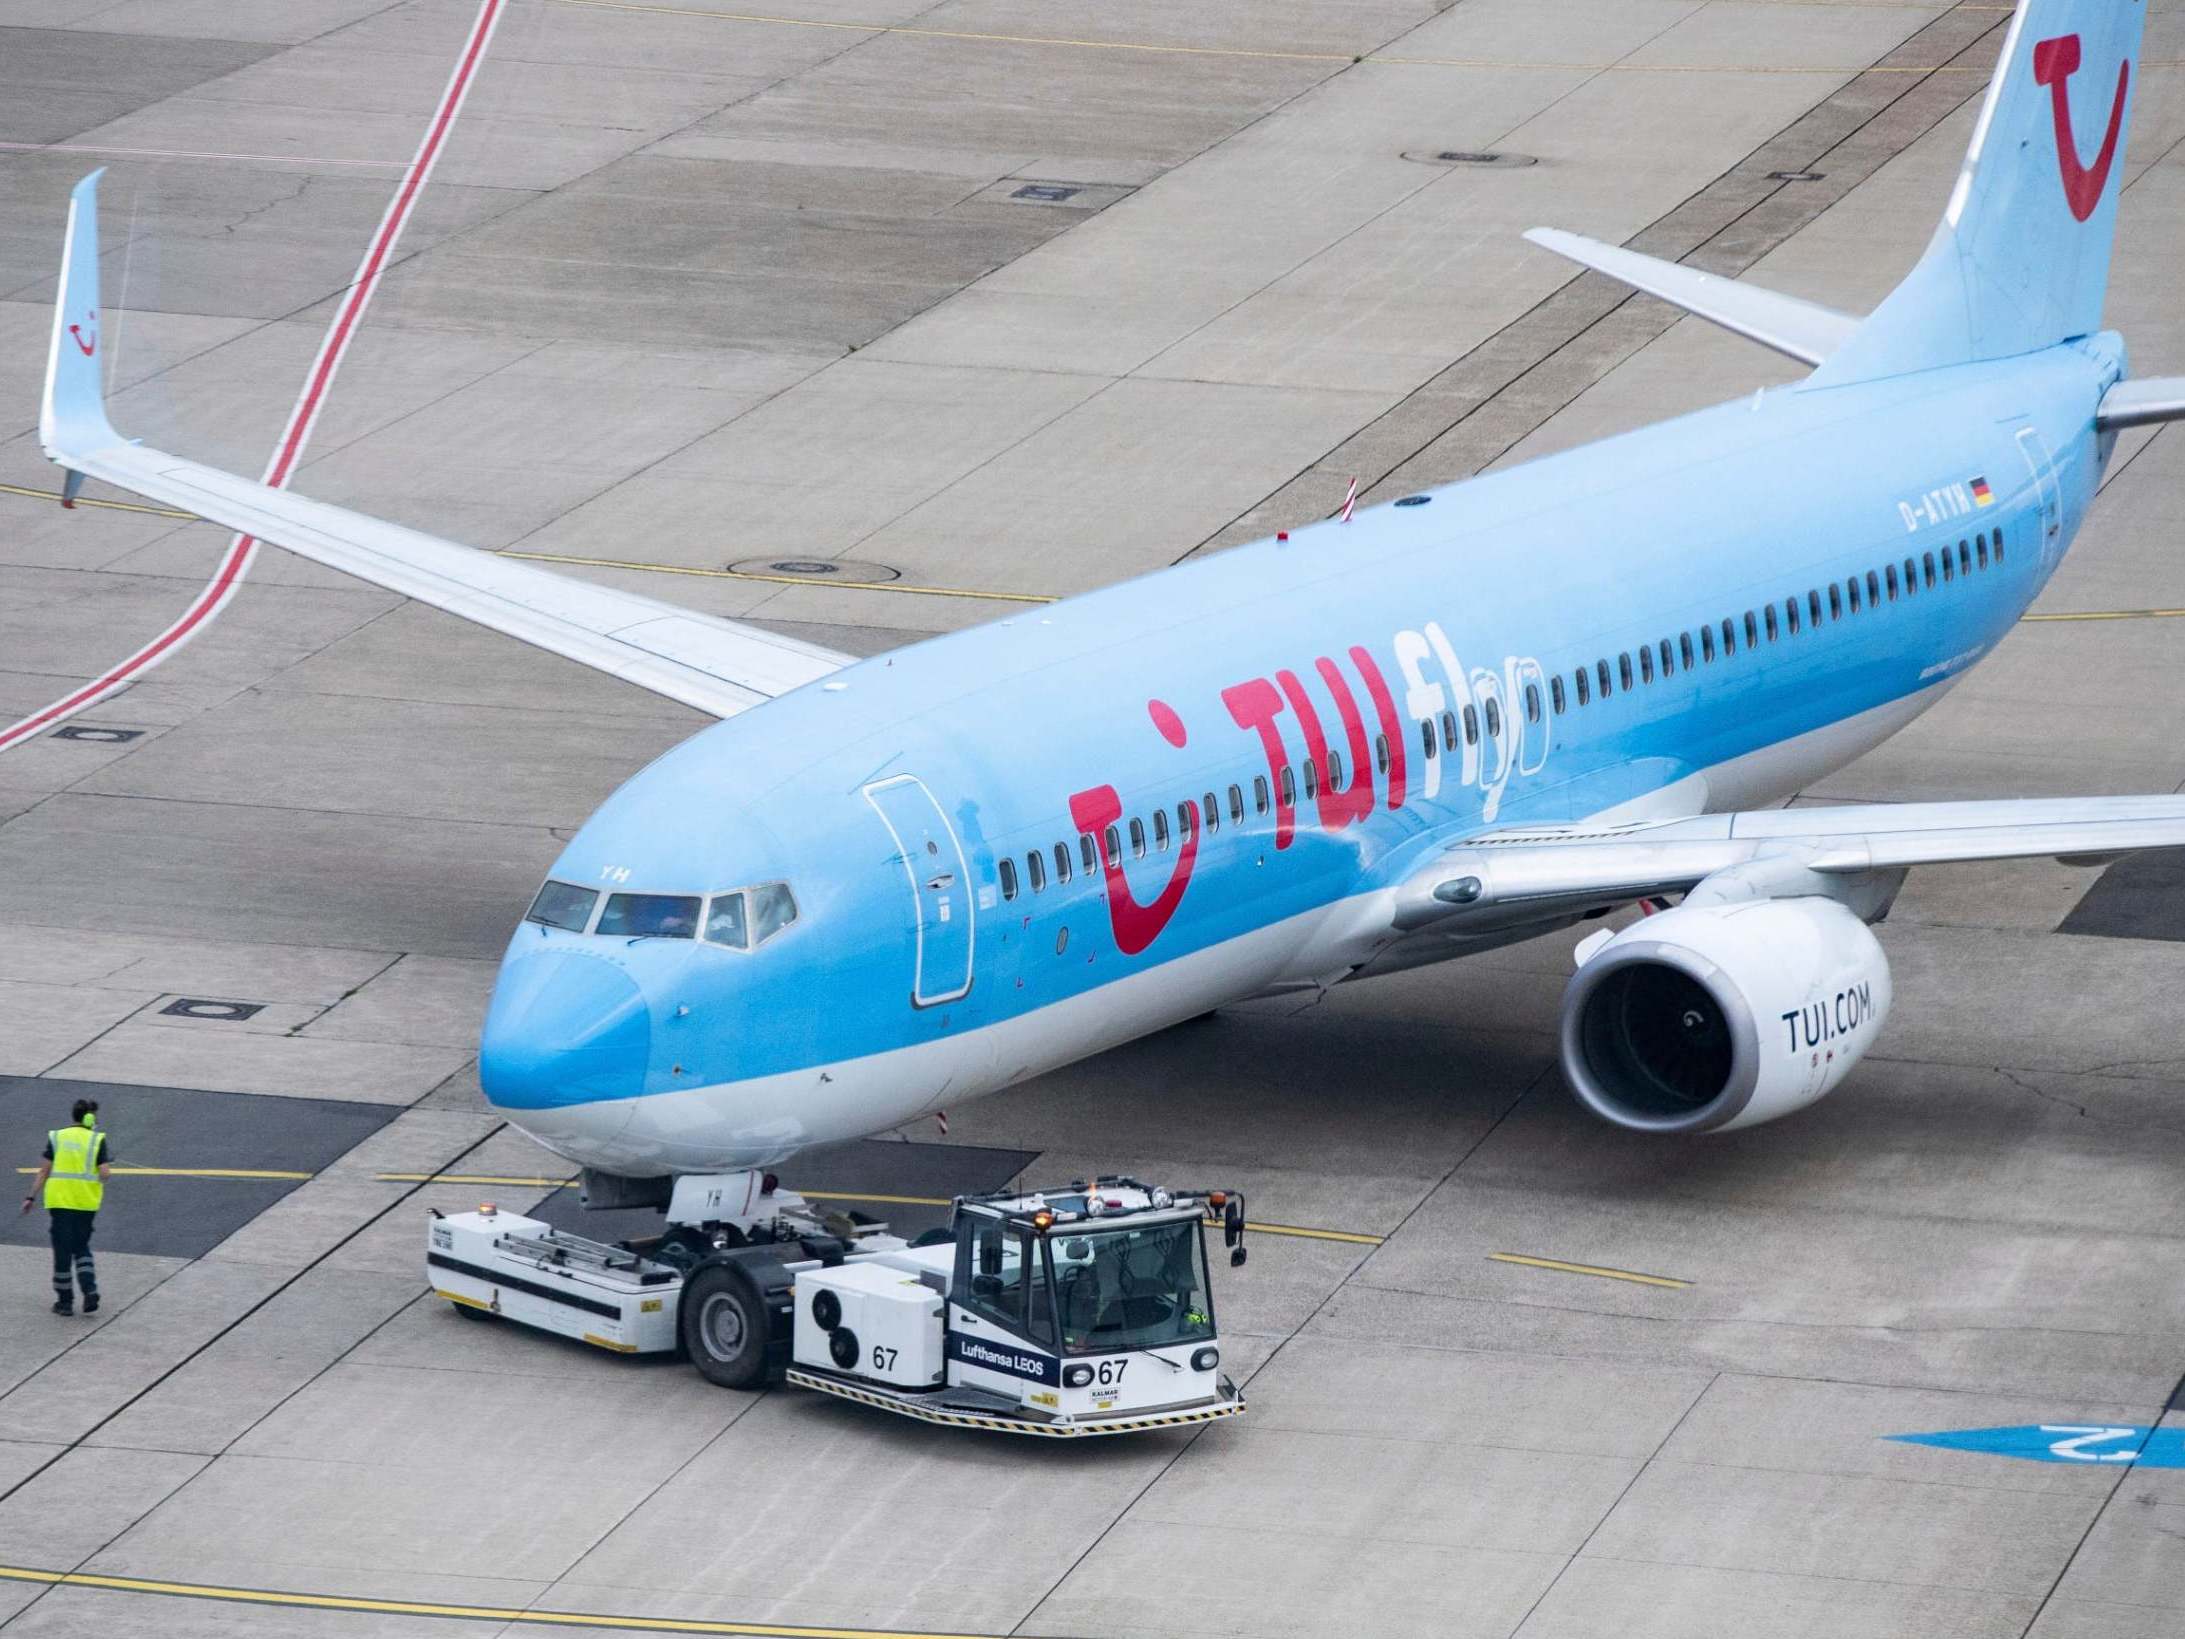 We will never know what exactly happened on Tui flight 6215